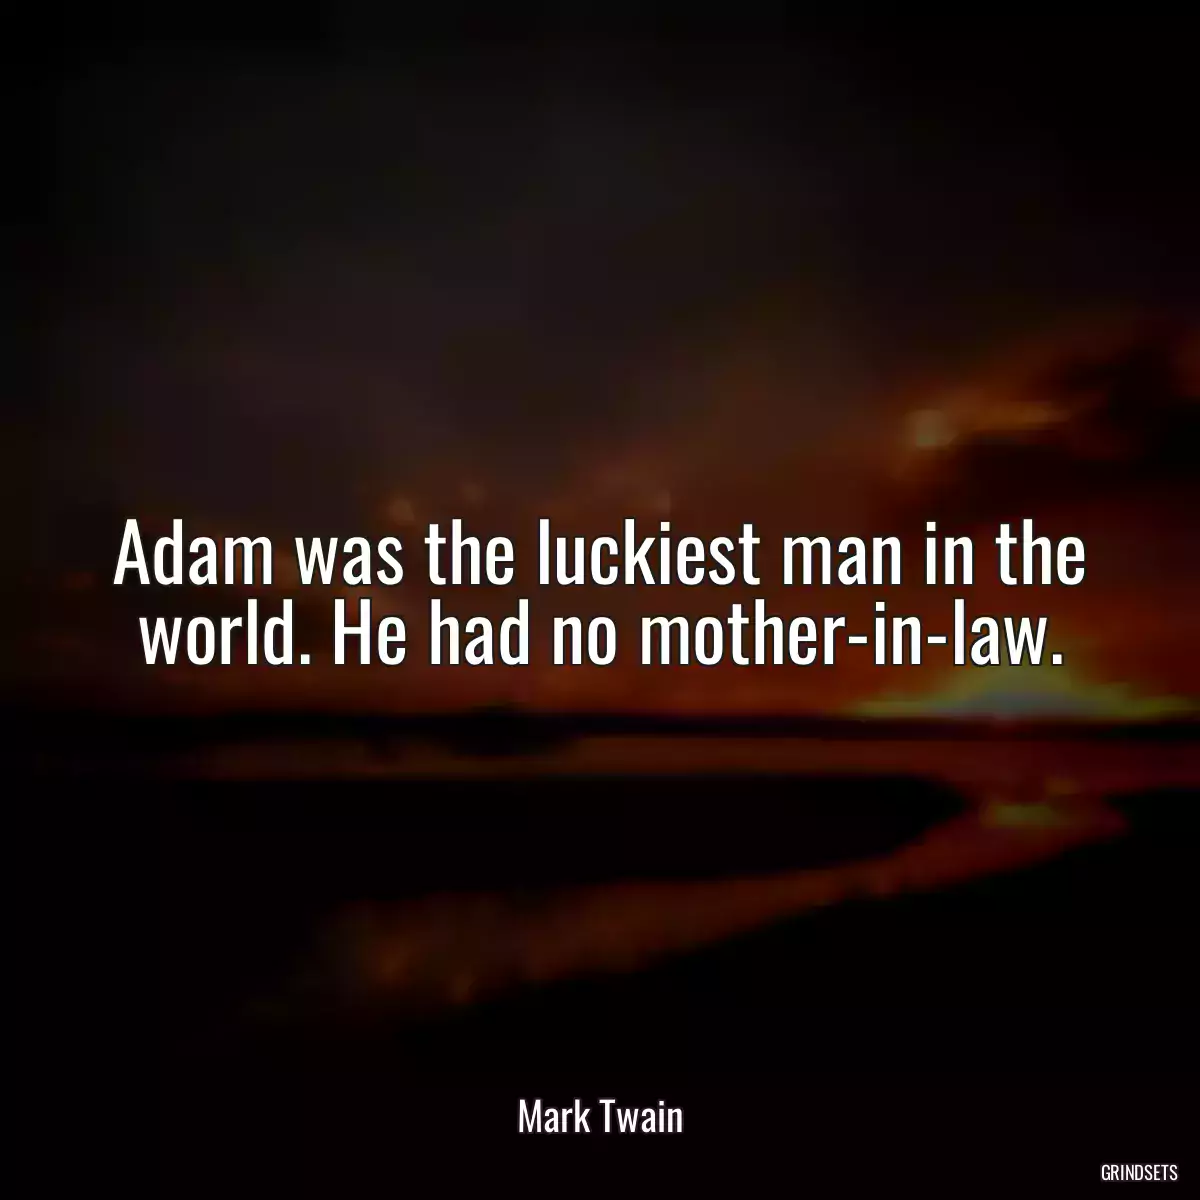 Adam was the luckiest man in the world. He had no mother-in-law.